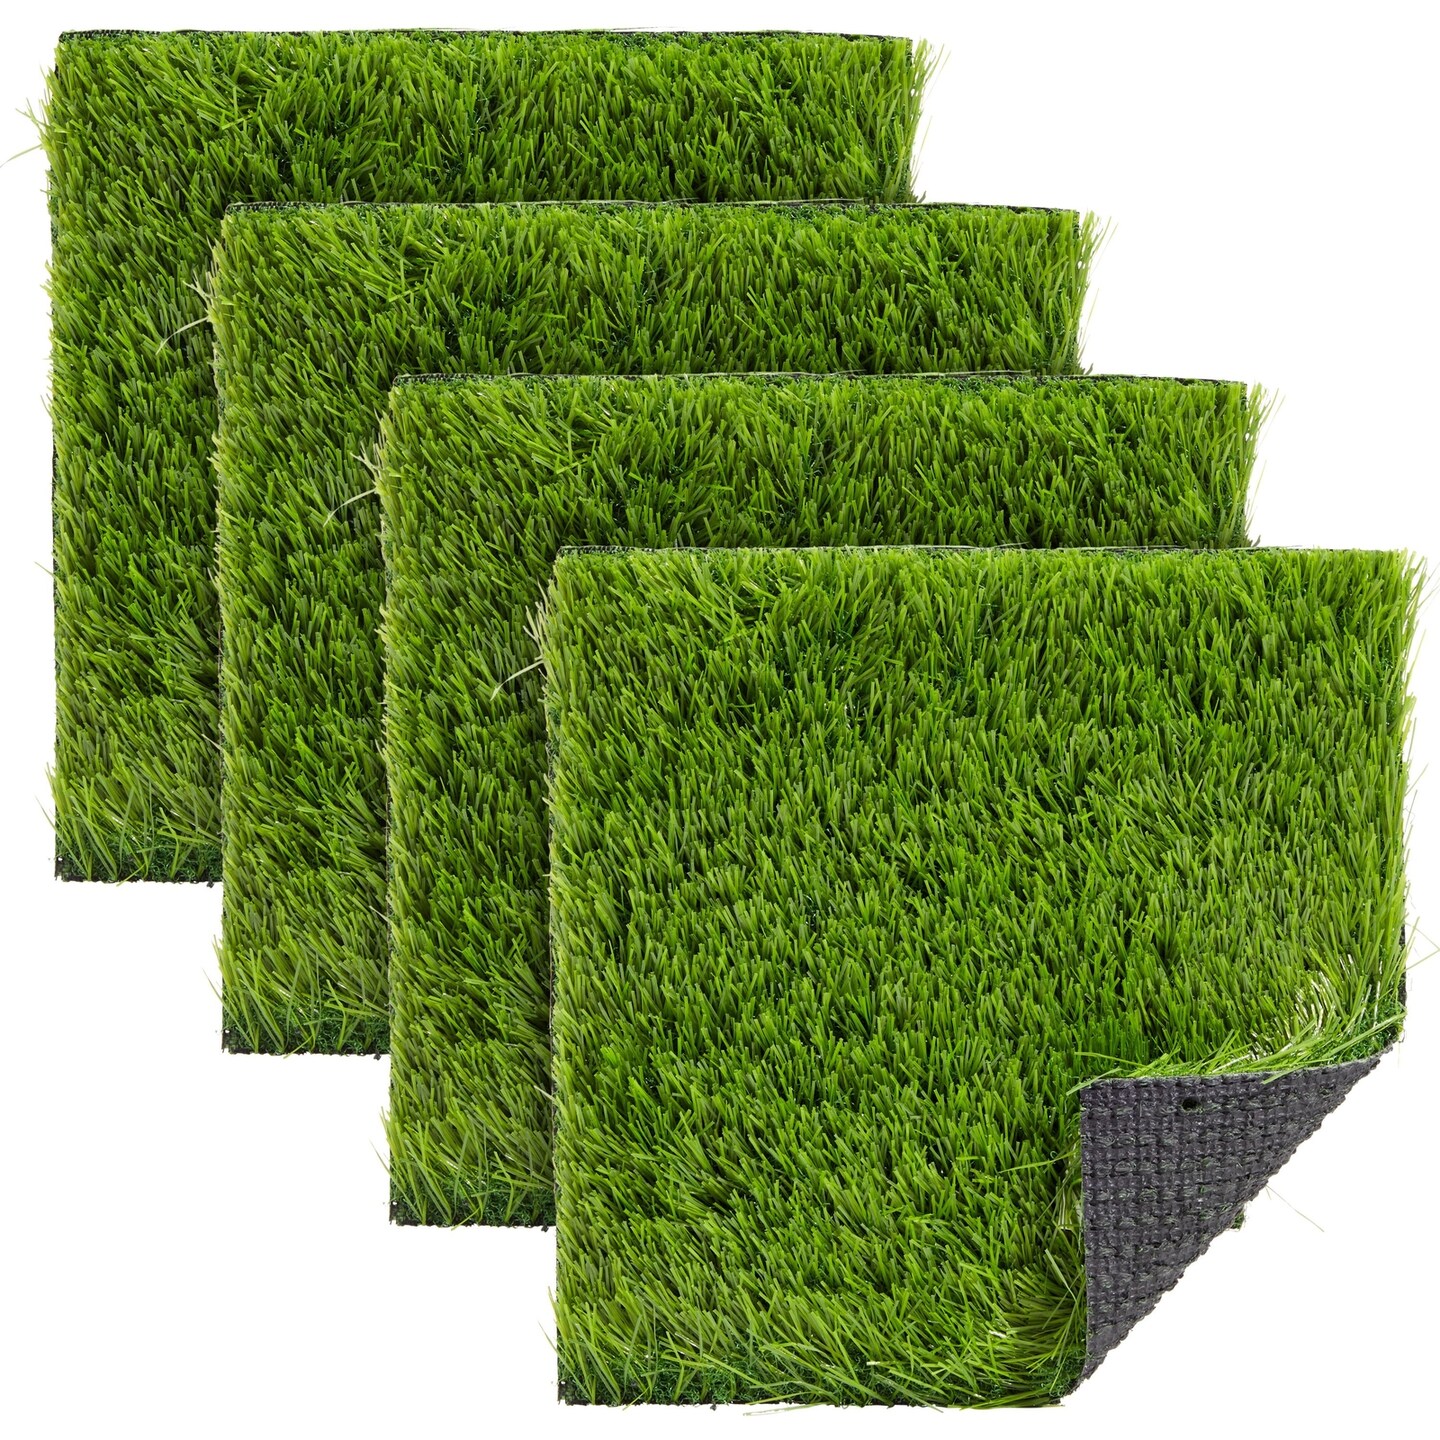 4-Pack Artificial Grass Mat Squares, 12x12-Inch Fake Turf Tiles for Balcony, Patio, Outdoor Faux Placemats, DIY Crafts and Decorations (Green, 0.75-Inch Pile Height)